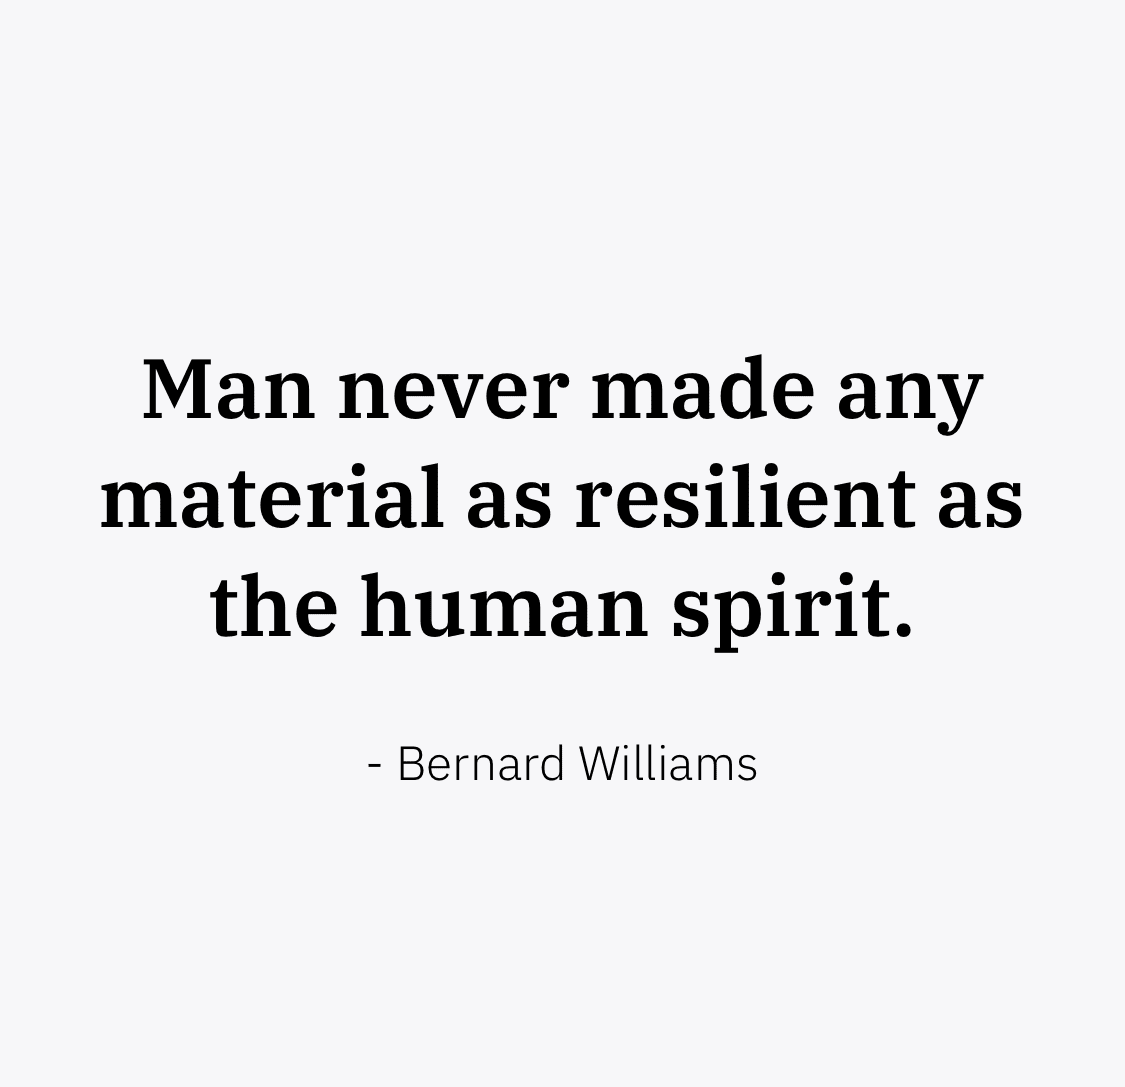 "Man never made any material as resilient as the human spirit."  Bernard Williams